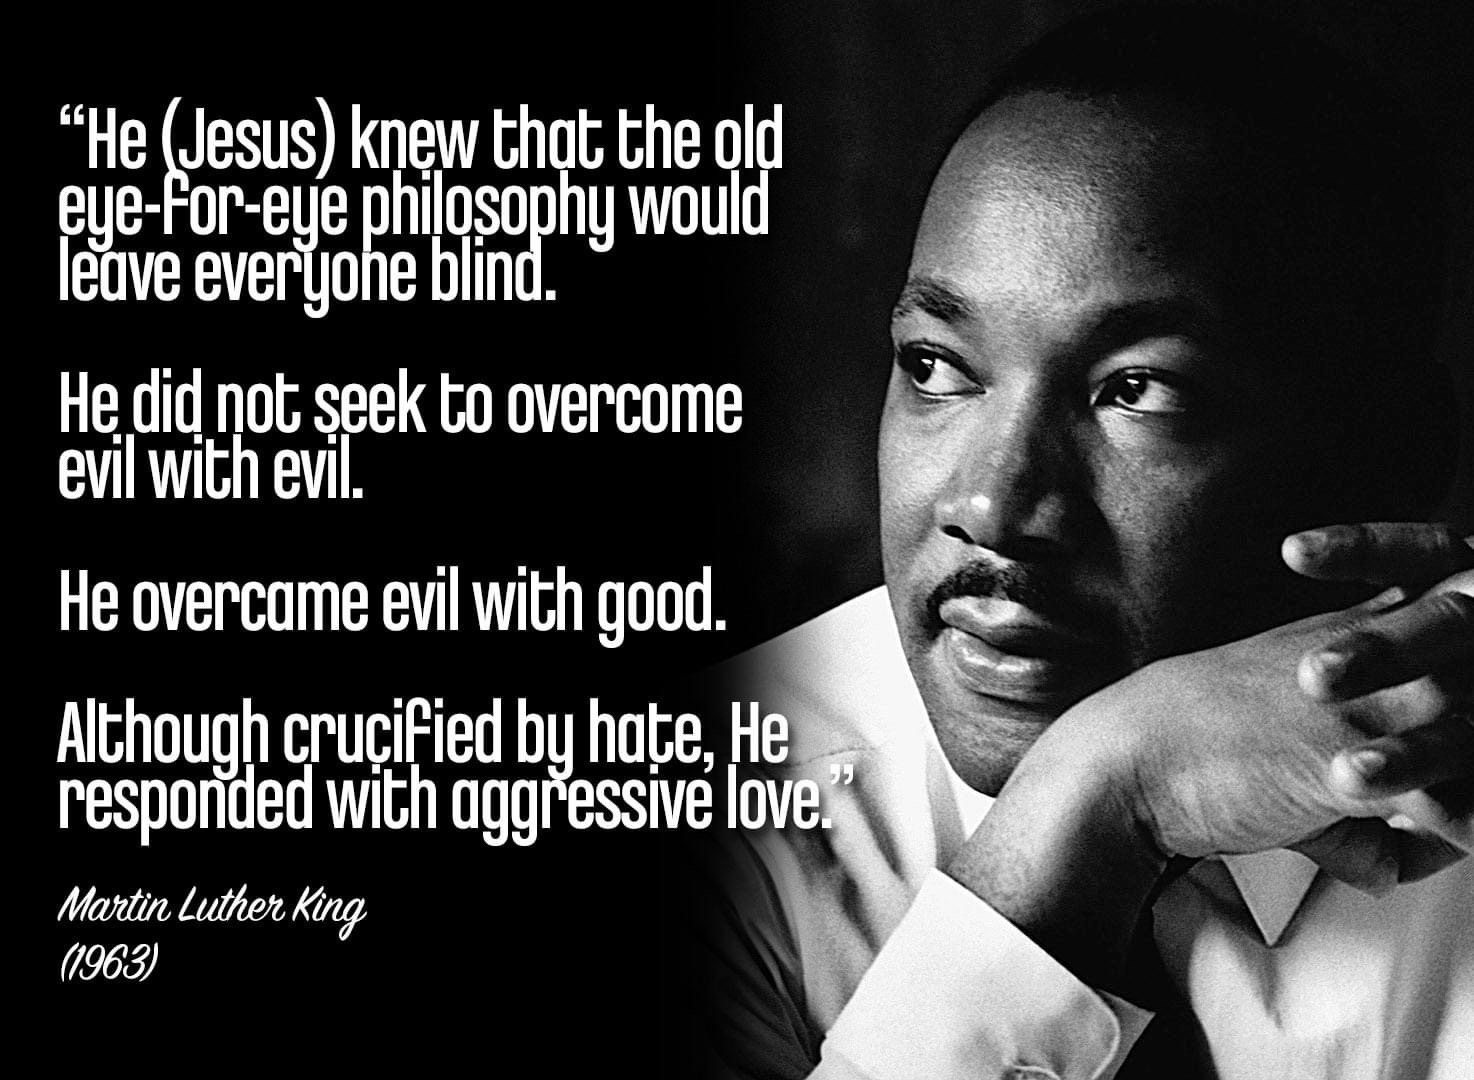 He (Jesus) knew that the old eye-for-eye philosophy would leave everyone blind. He did not seek to overcome evil with evil. He overcame evil with good. Although crucified by hate, He responded with aggressive love. Martin Luther King, Jr. 